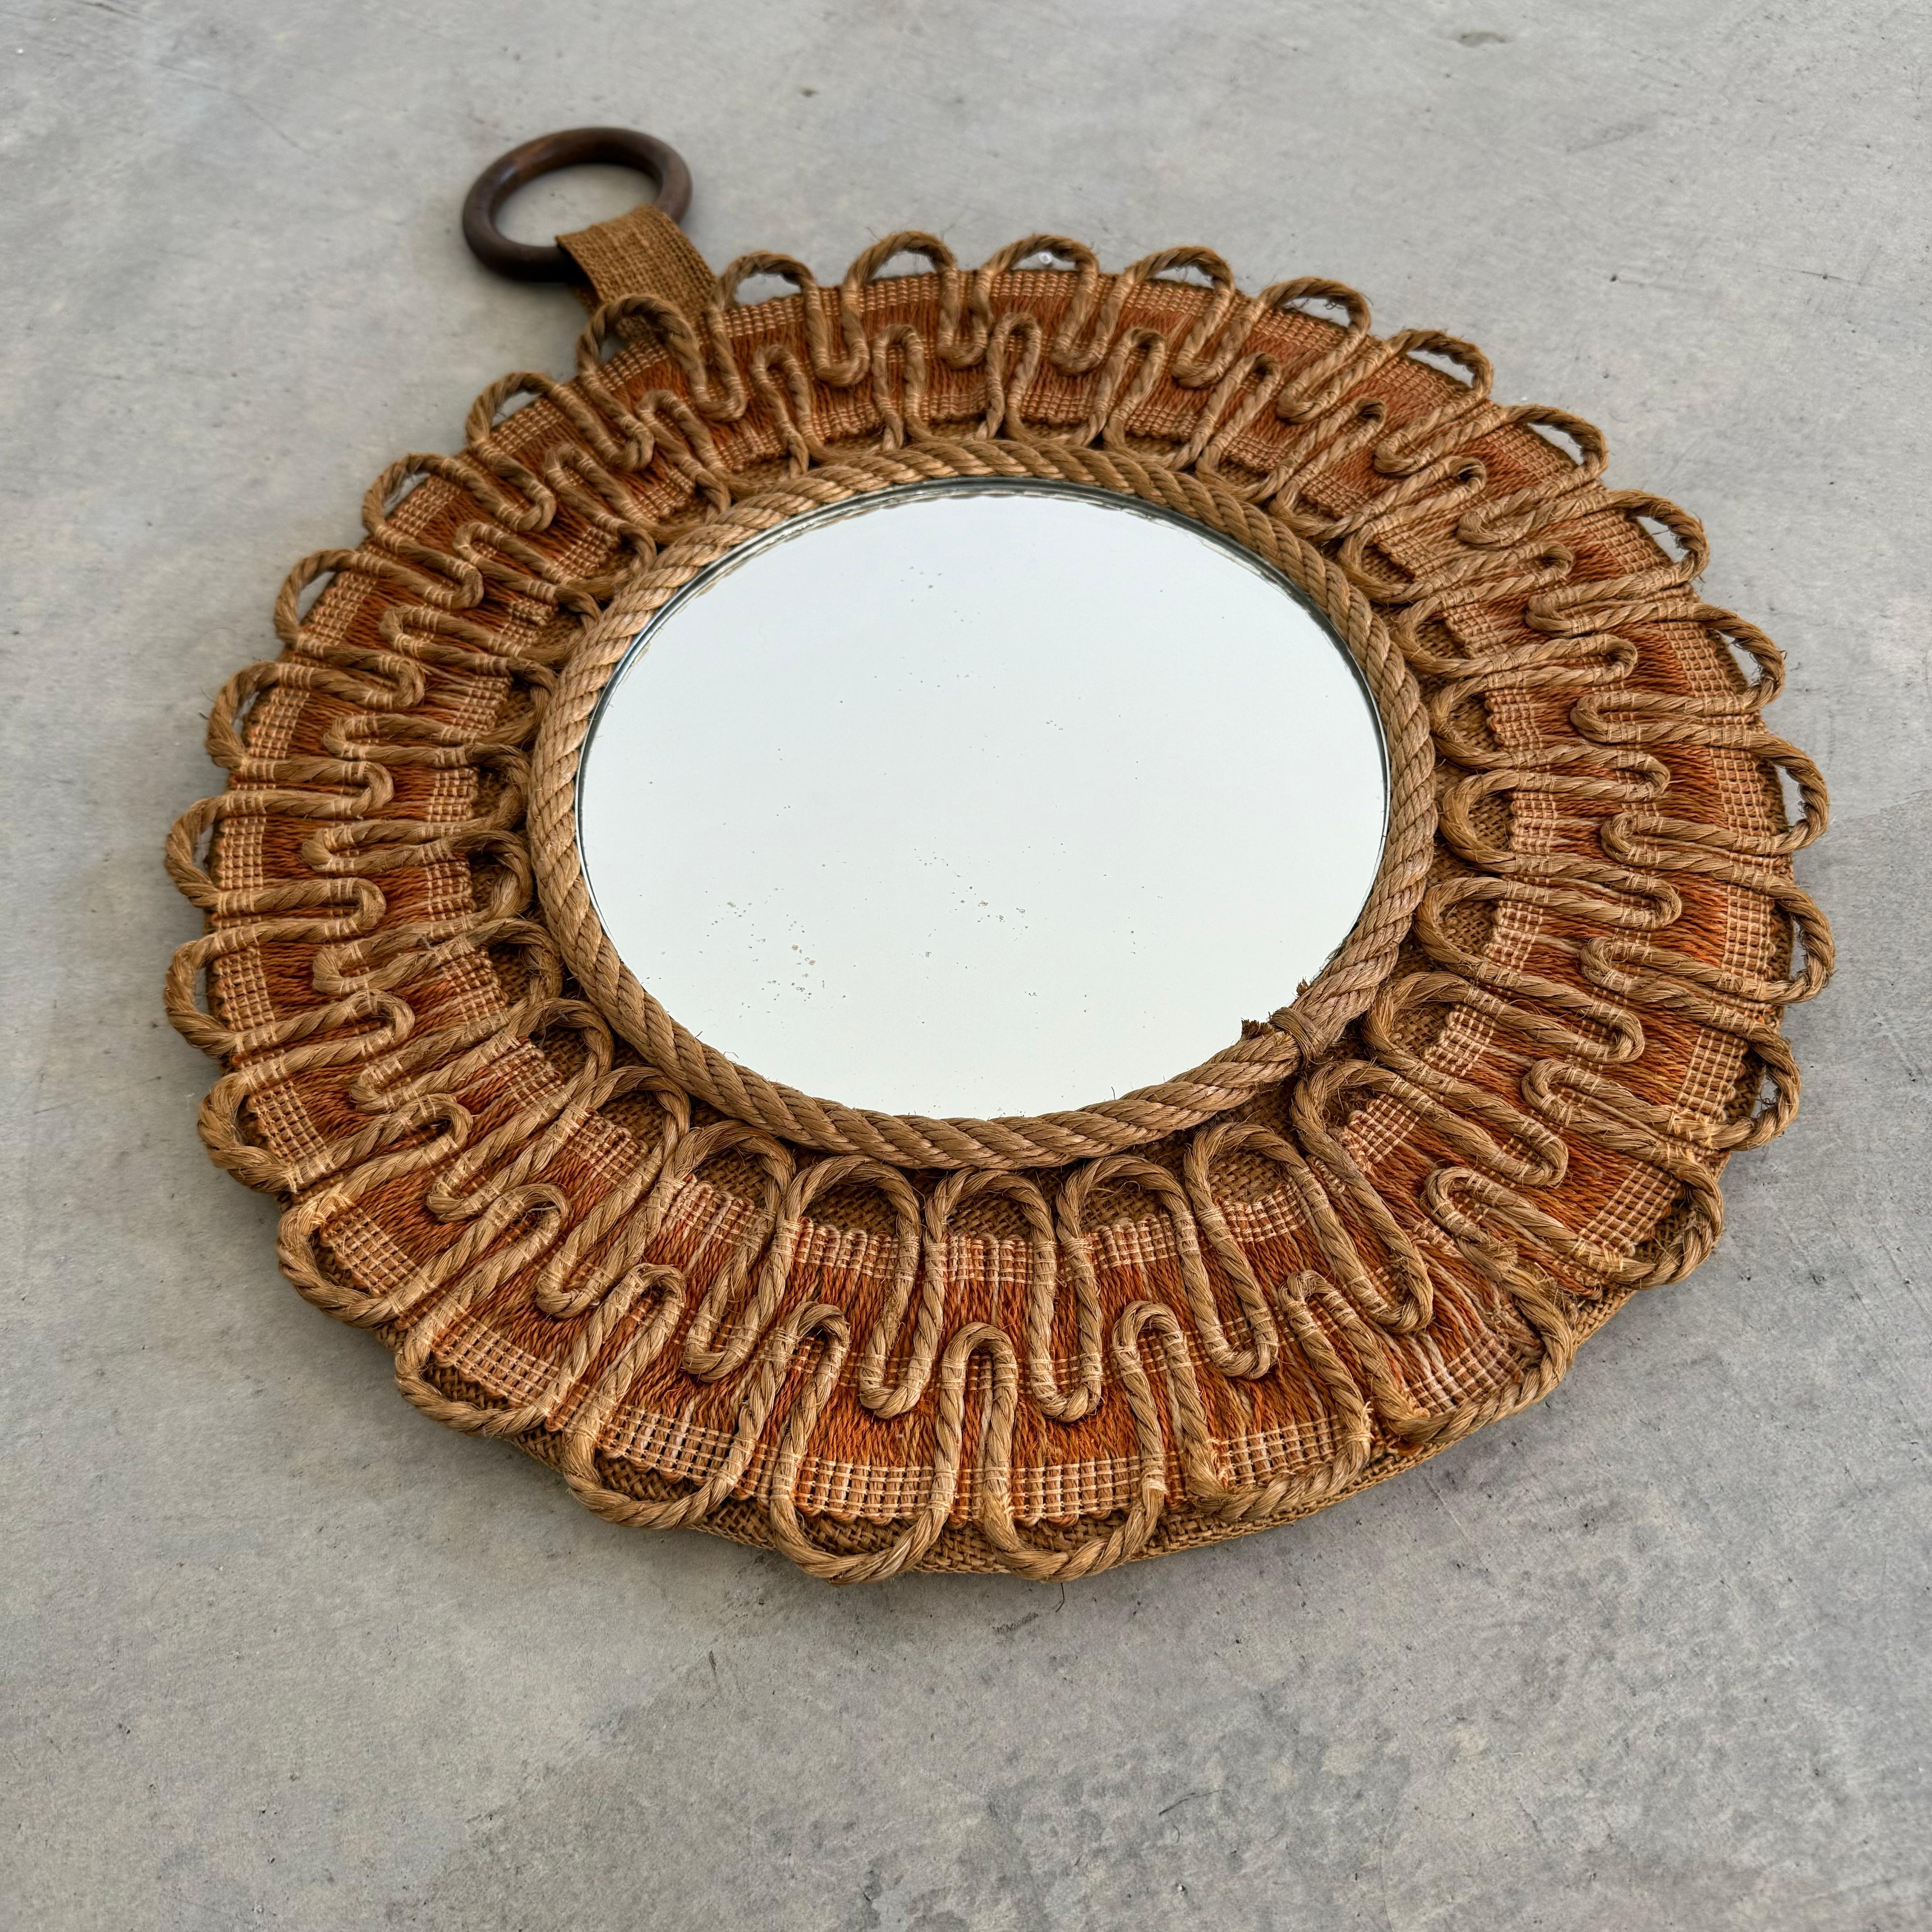 Gorgeous circular mirror made in France, circa 1950s. In the style of Audoux Minet. Undulating rope loops surround the outer frame of the mirror with a braided rope band immediately surrounding the glass. Hanging tab with circular wooden ring for